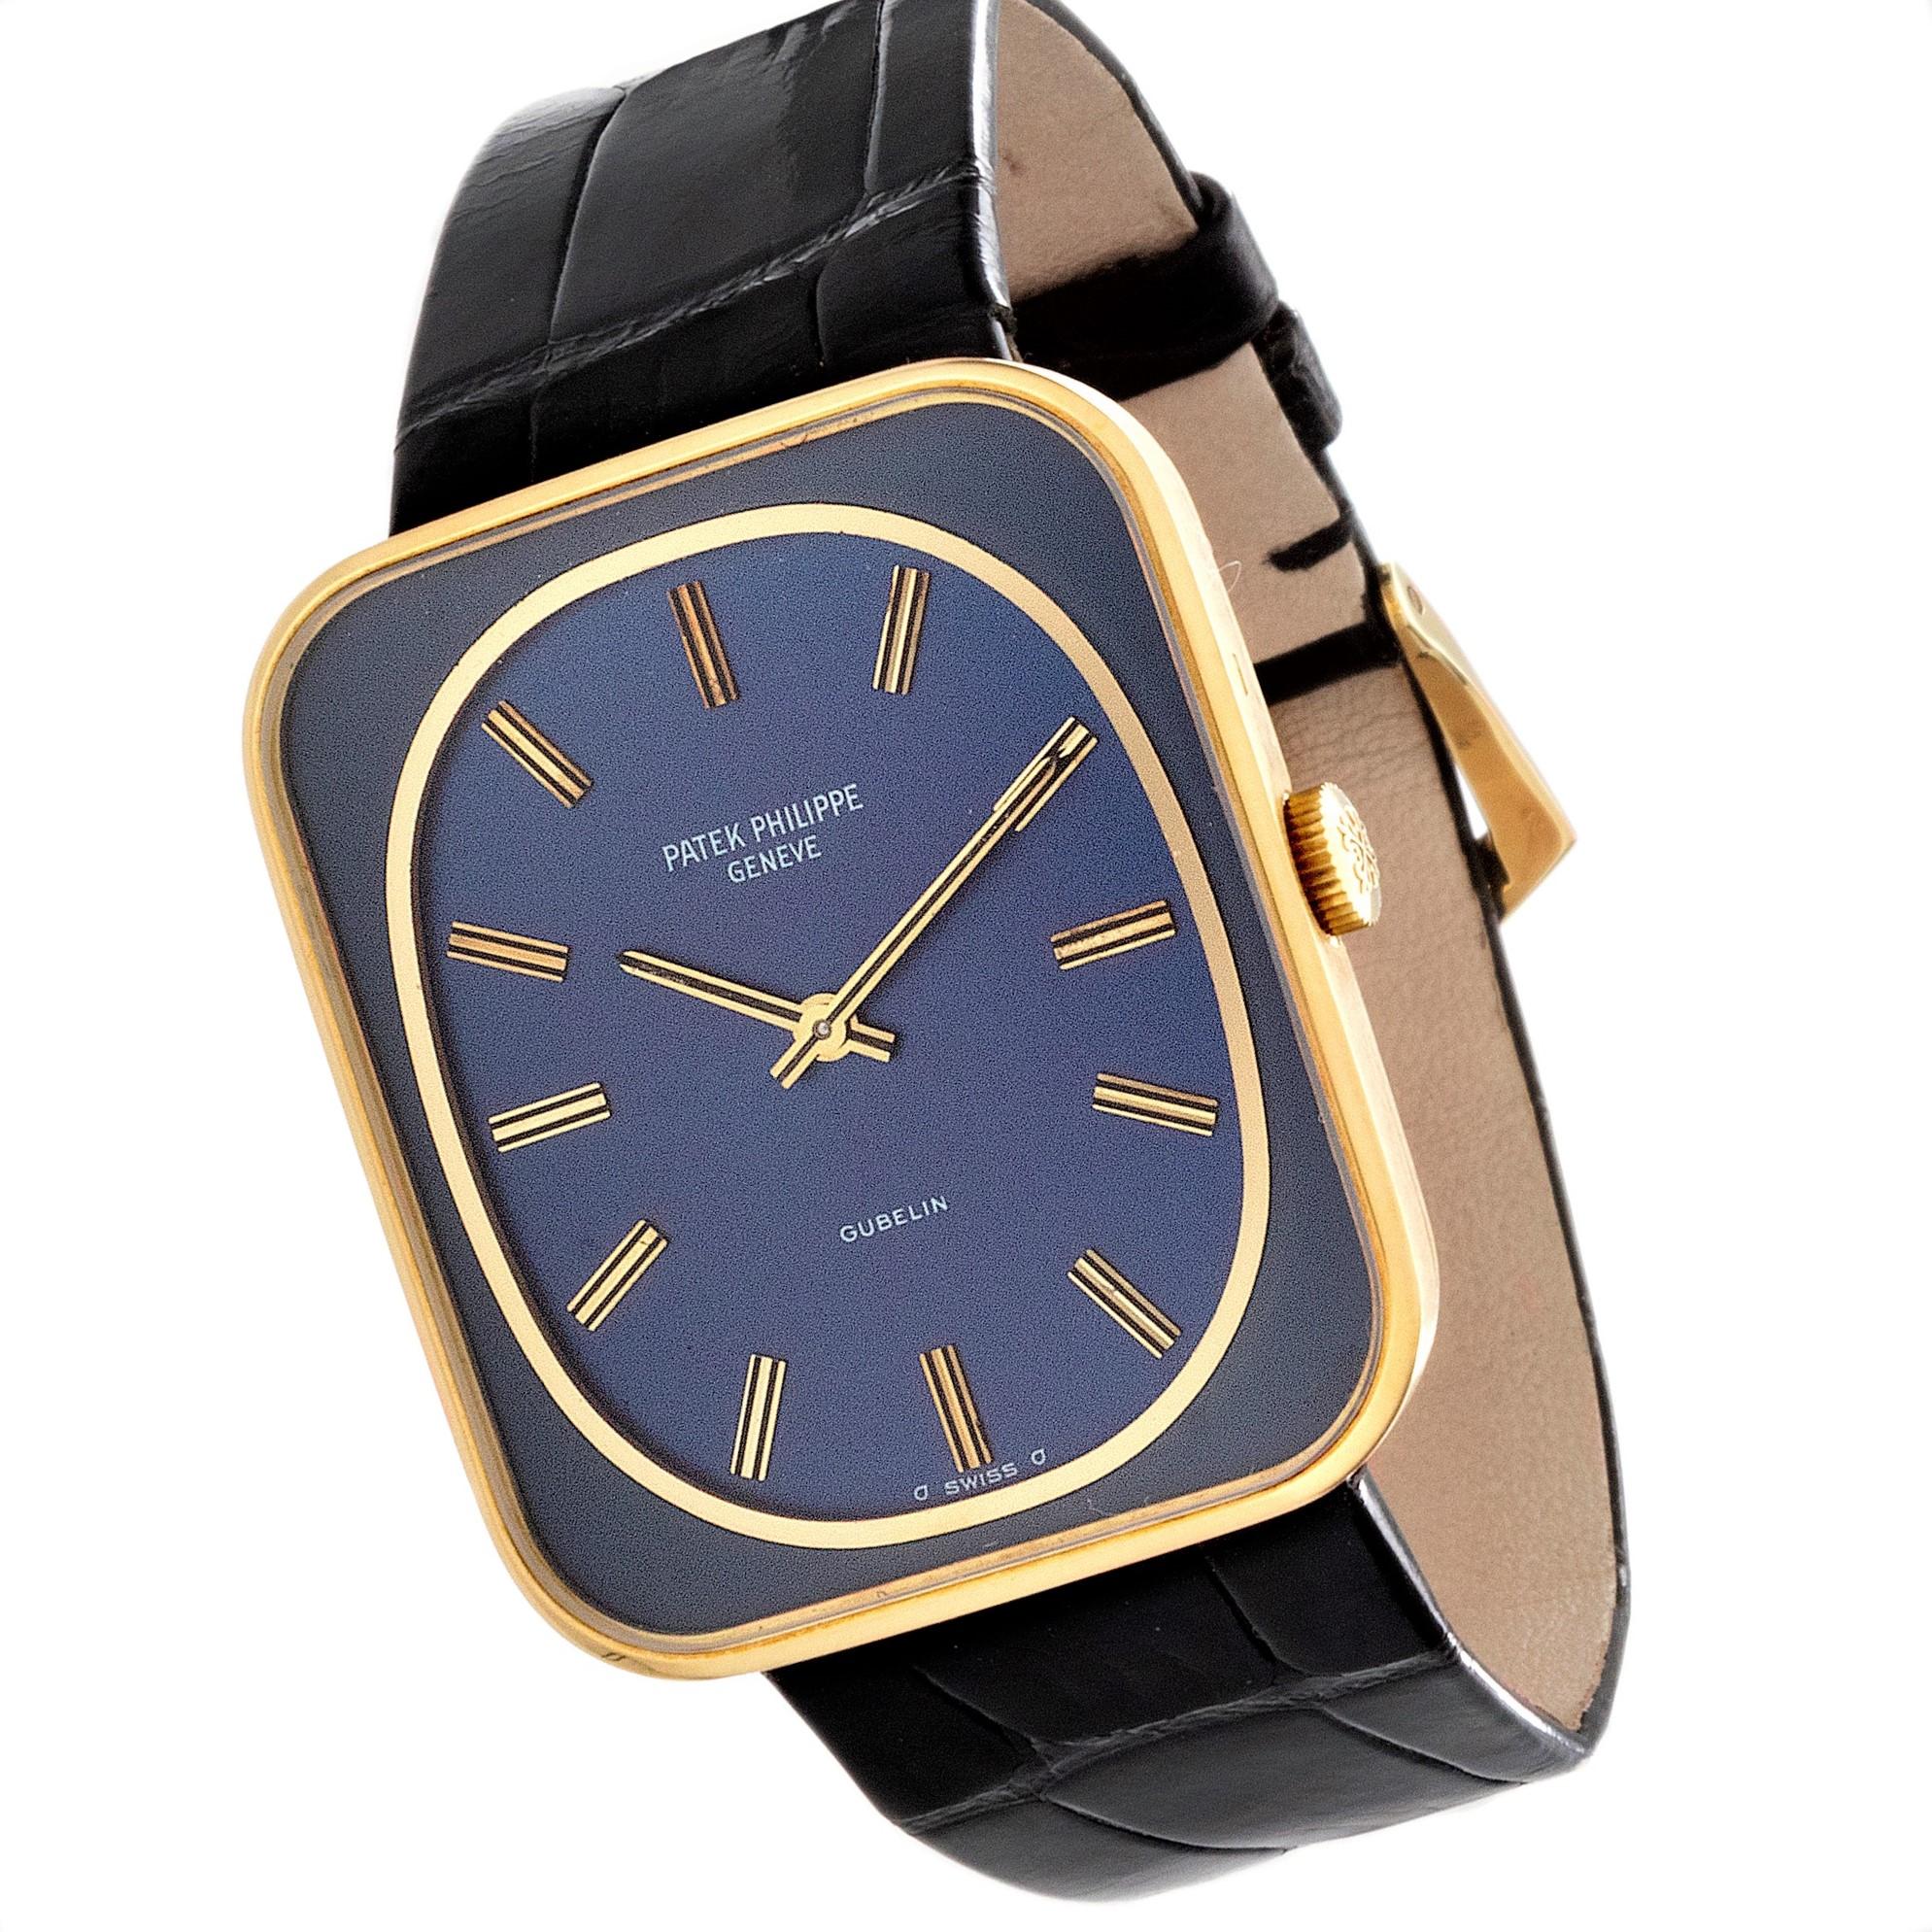 This rare 3582J Patek Philippe vintage blue dial watch features 3-body case, sapphire crystal and new Patek alligator strap with original 18K yellow gold Patek buckle.  The watch was sold by Gueblin, the retail store in Zurich, Switzerland.

This